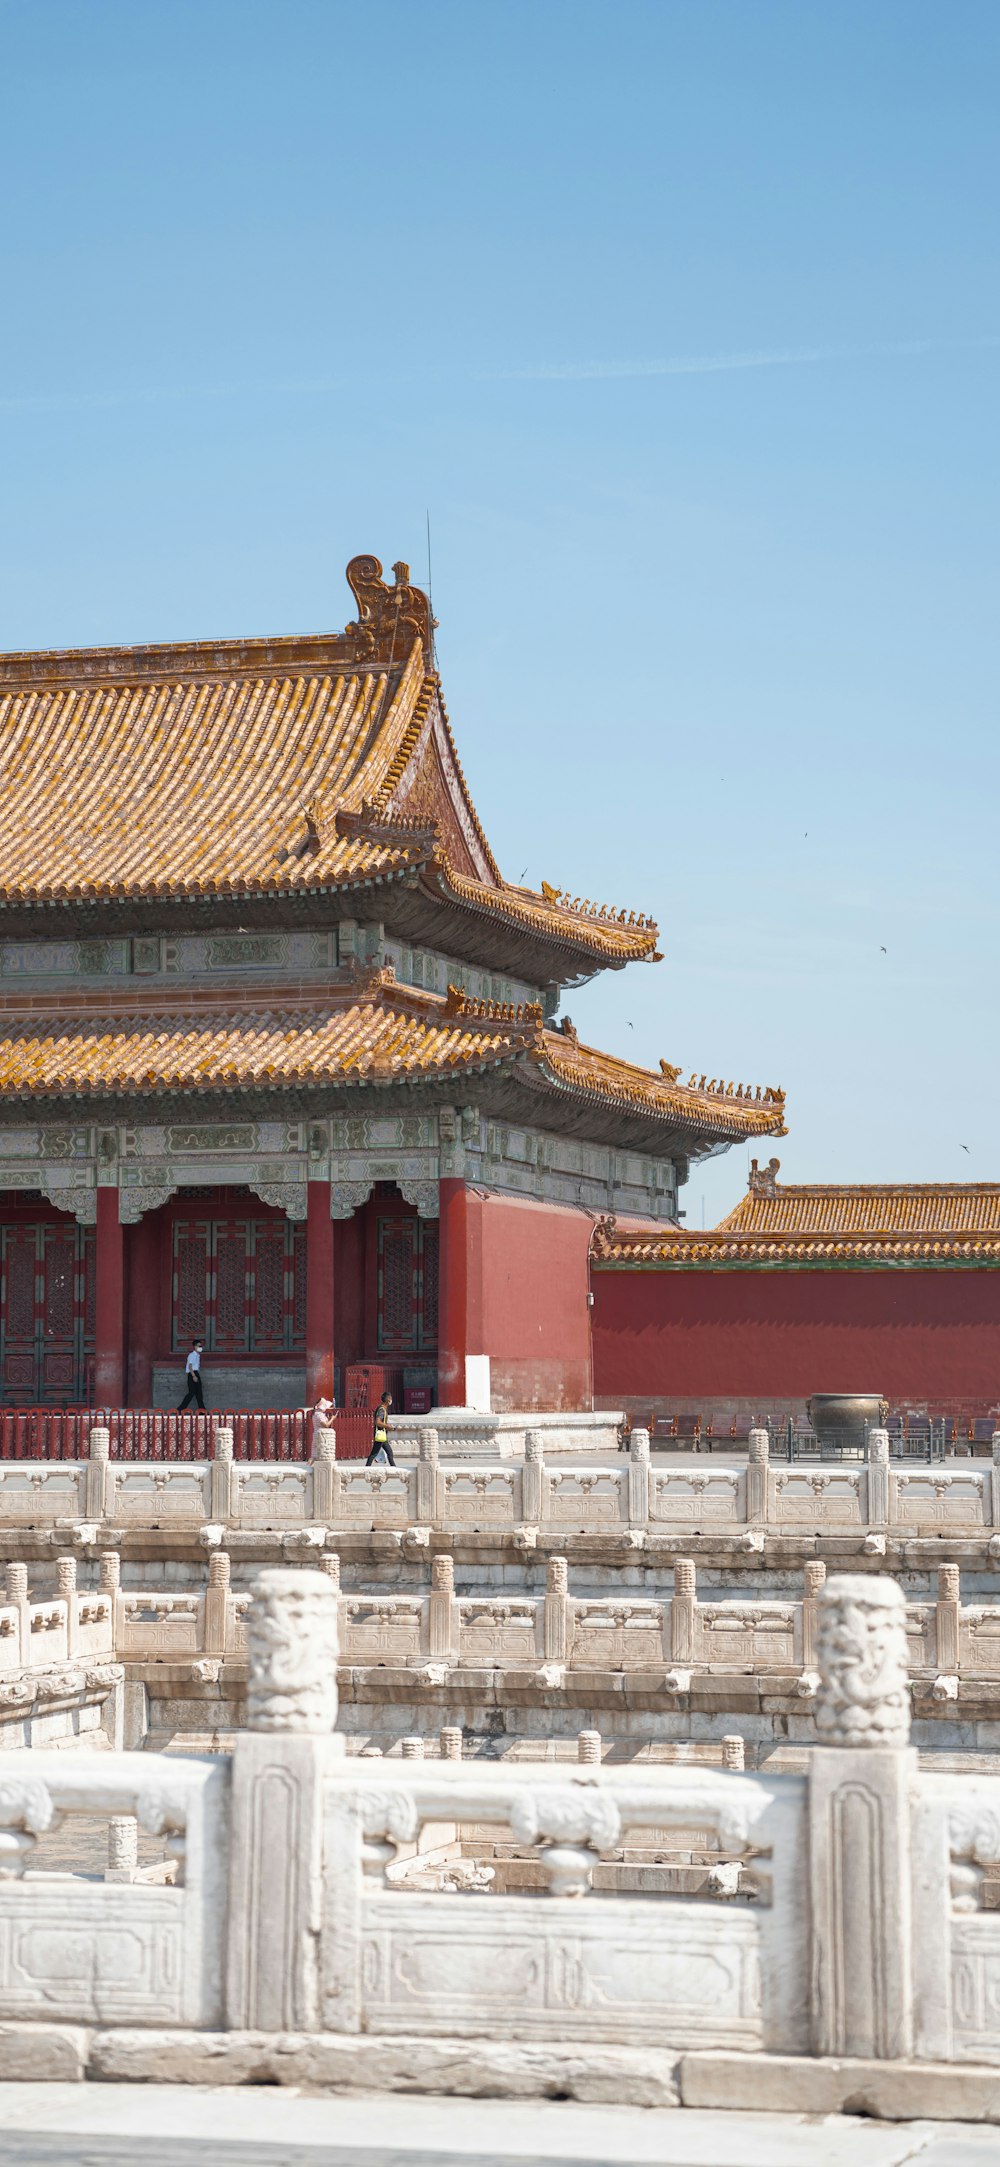 Forbidden City with a large ornate roof